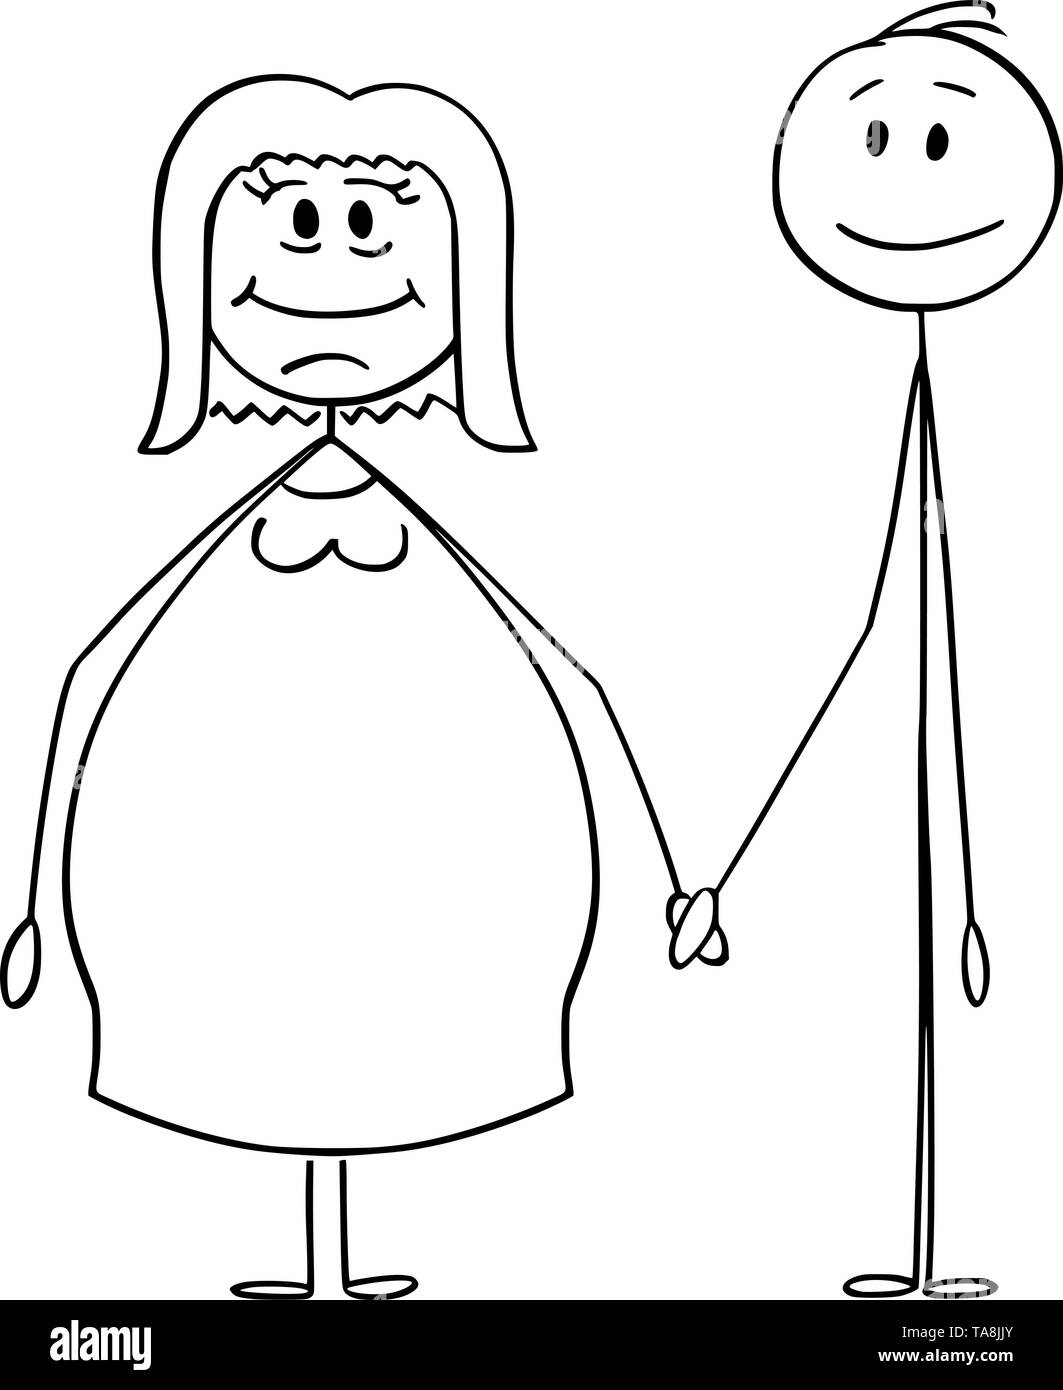 Vector cartoon stick figure drawing conceptual illustration of heterosexual couple of overweight or obese woman and slim man holding hands. Stock Vector